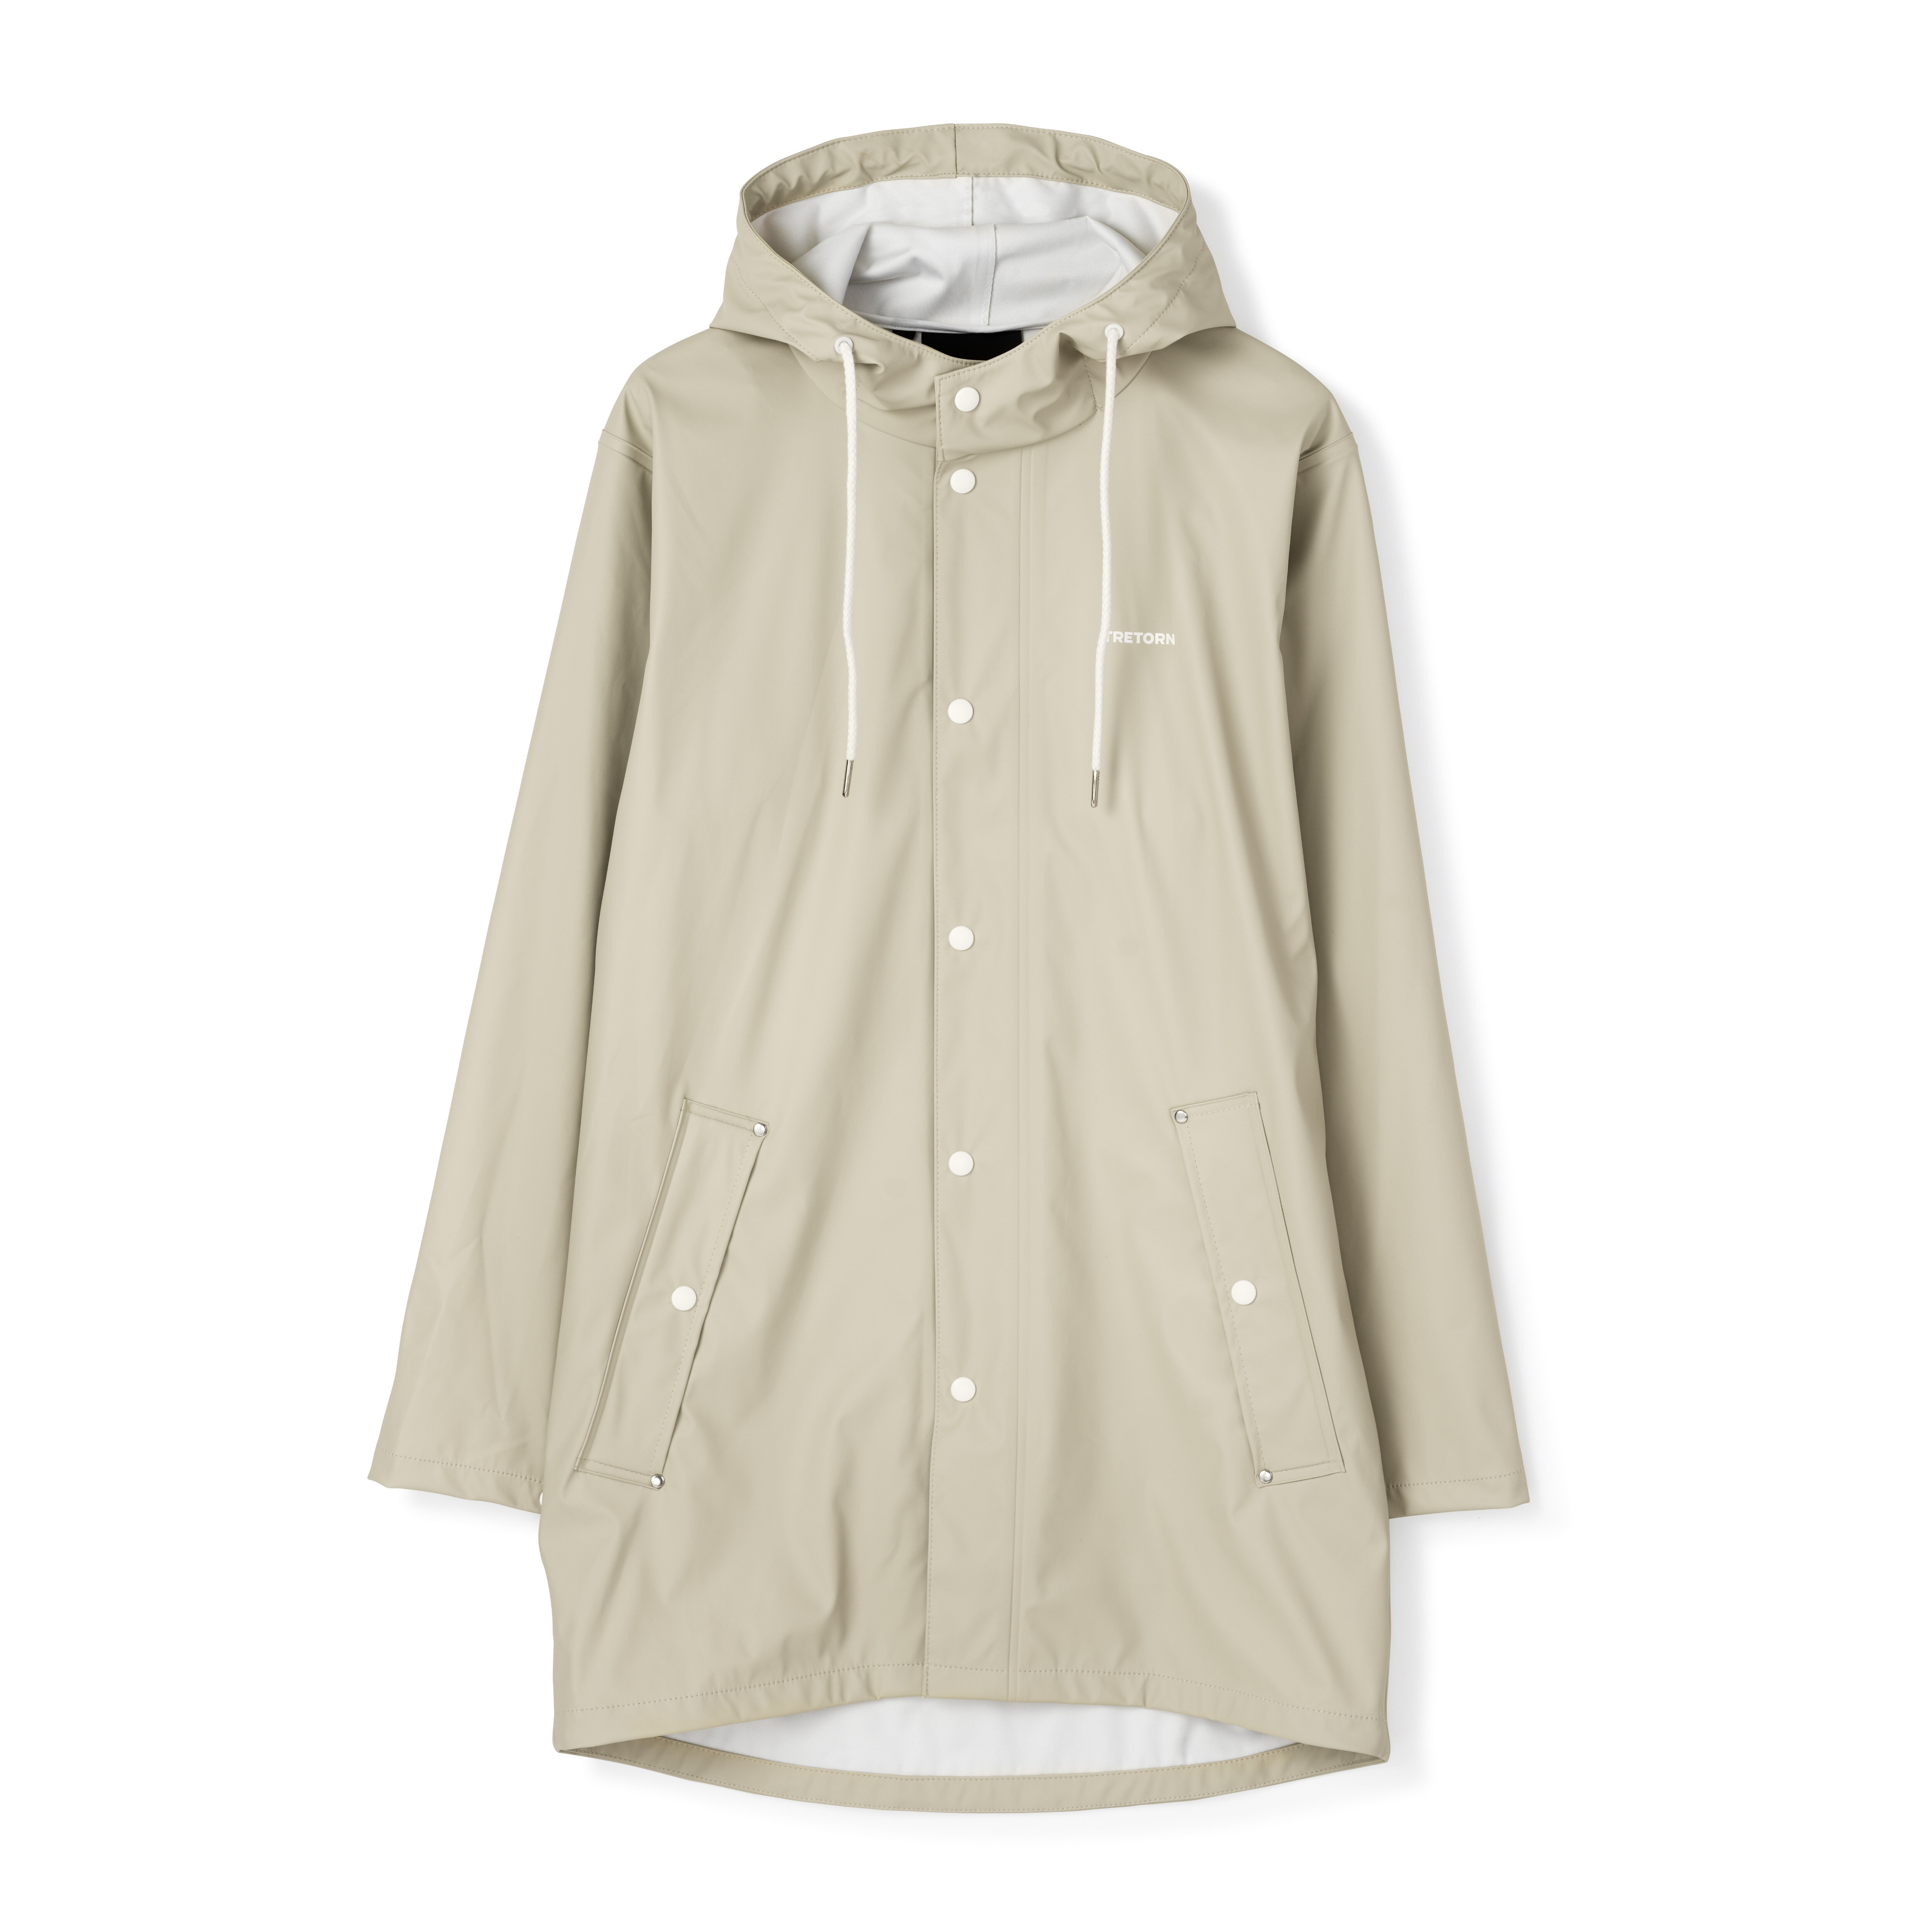 Wings rain jacket by Tretorn for men and women in the colour sand